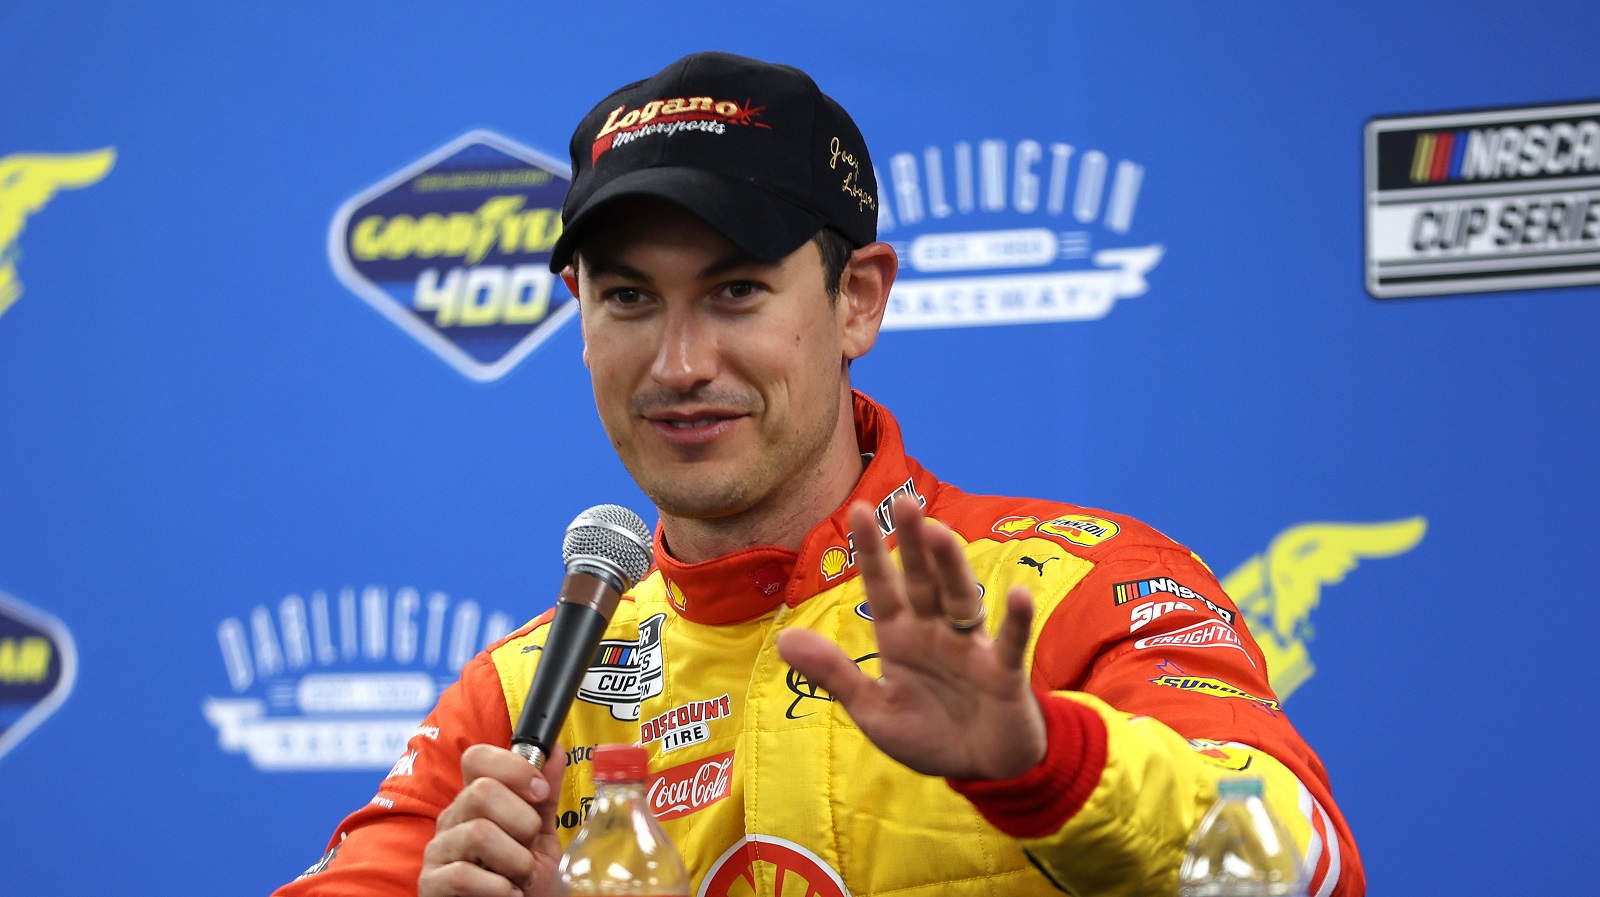 Joey Logano speaks to the media after winning the NASCAR Cup Series Goodyear 400 at Darlington Raceway on May 8, 2022.